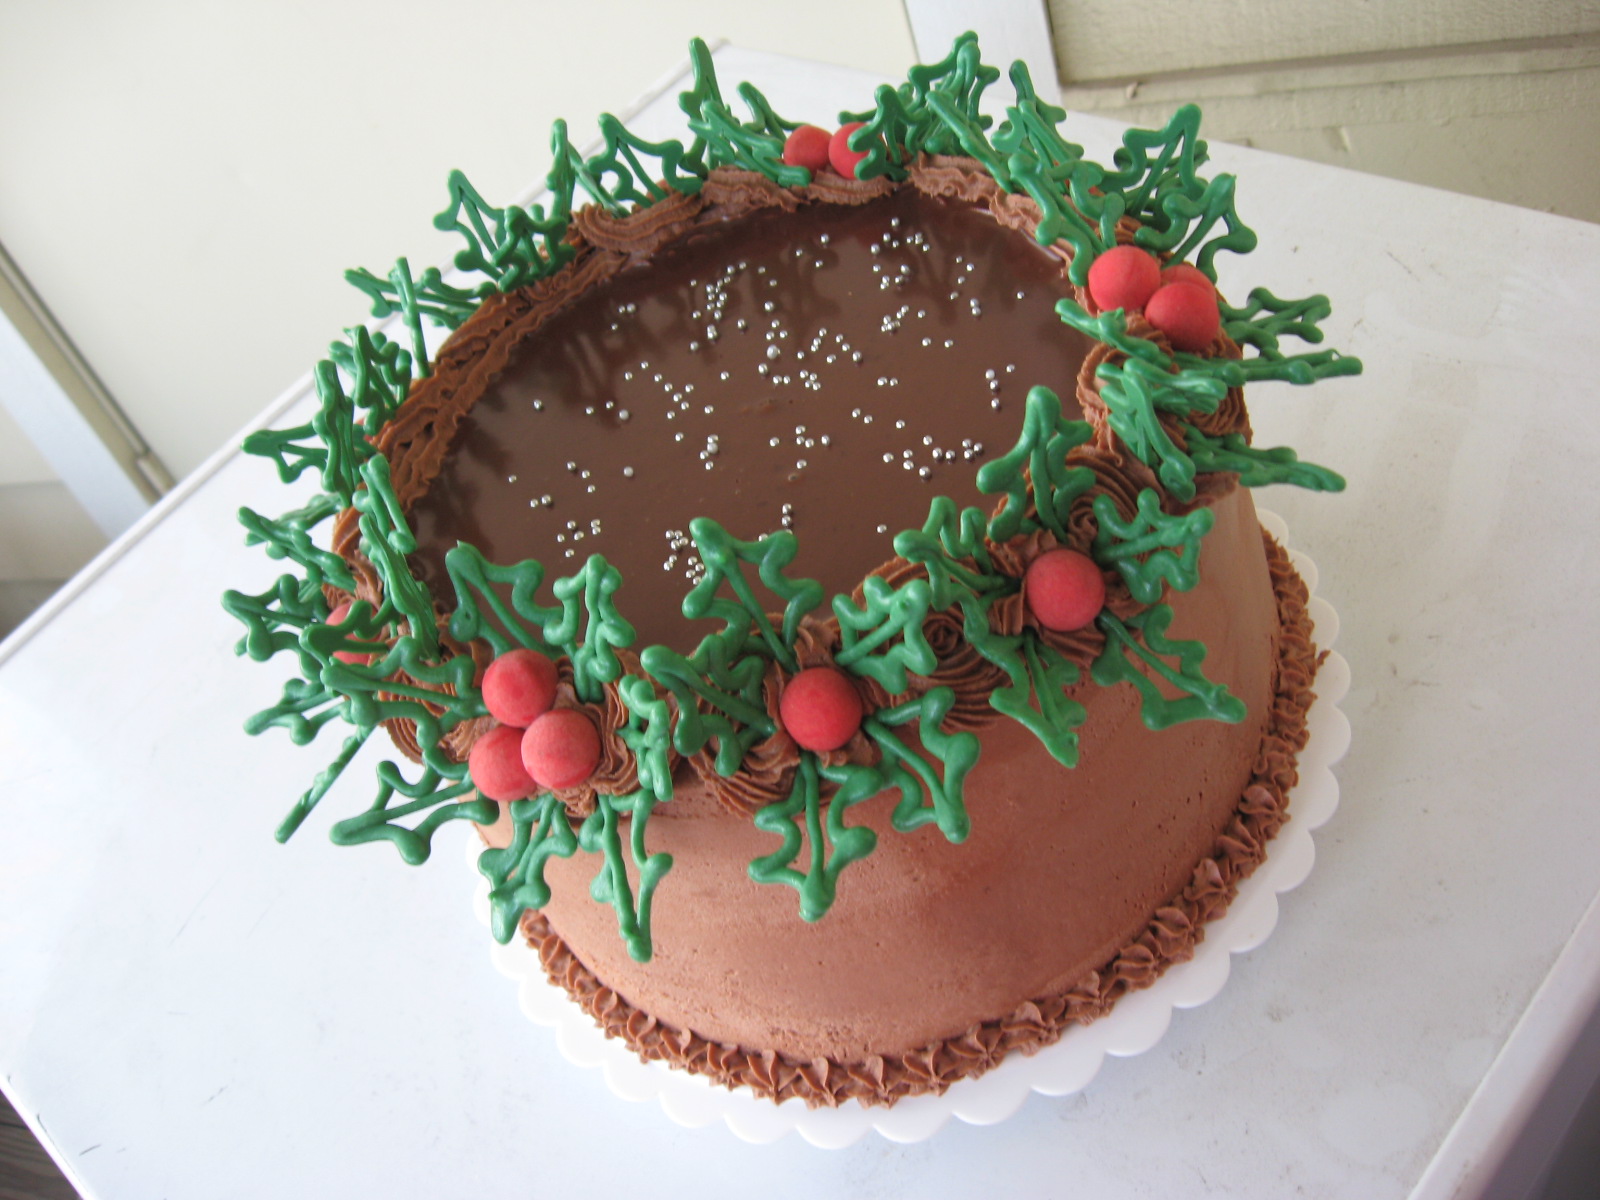 The Best Christmas Deserts Recipes - Happy New Year 2015